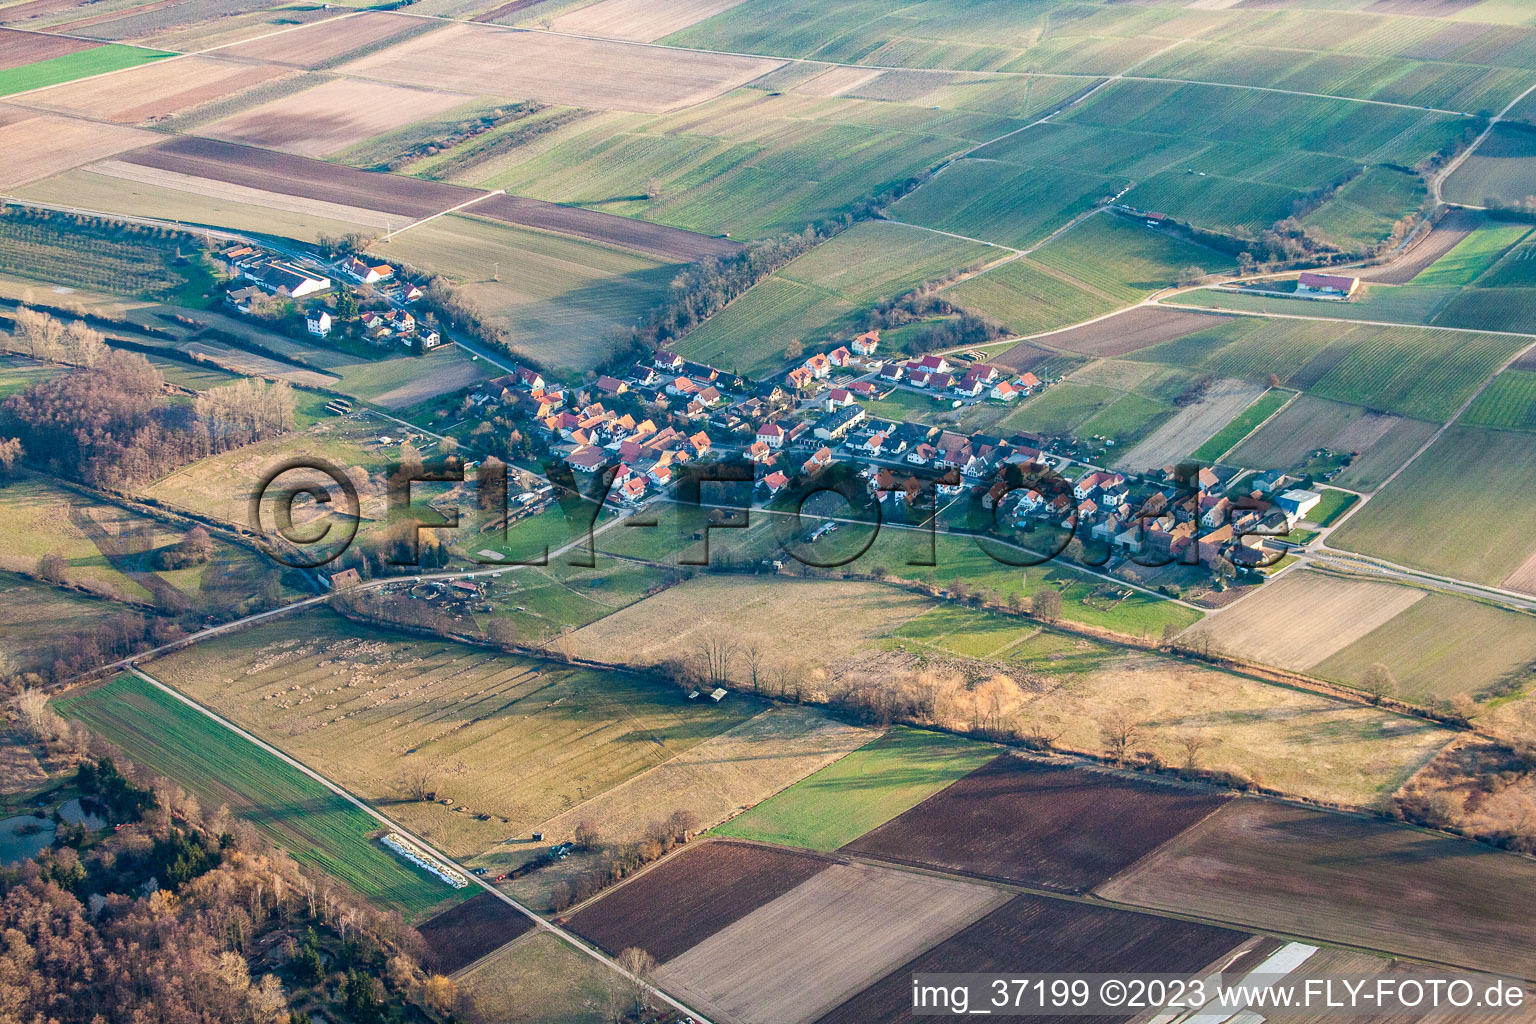 Bird's eye view of Hergersweiler in the state Rhineland-Palatinate, Germany